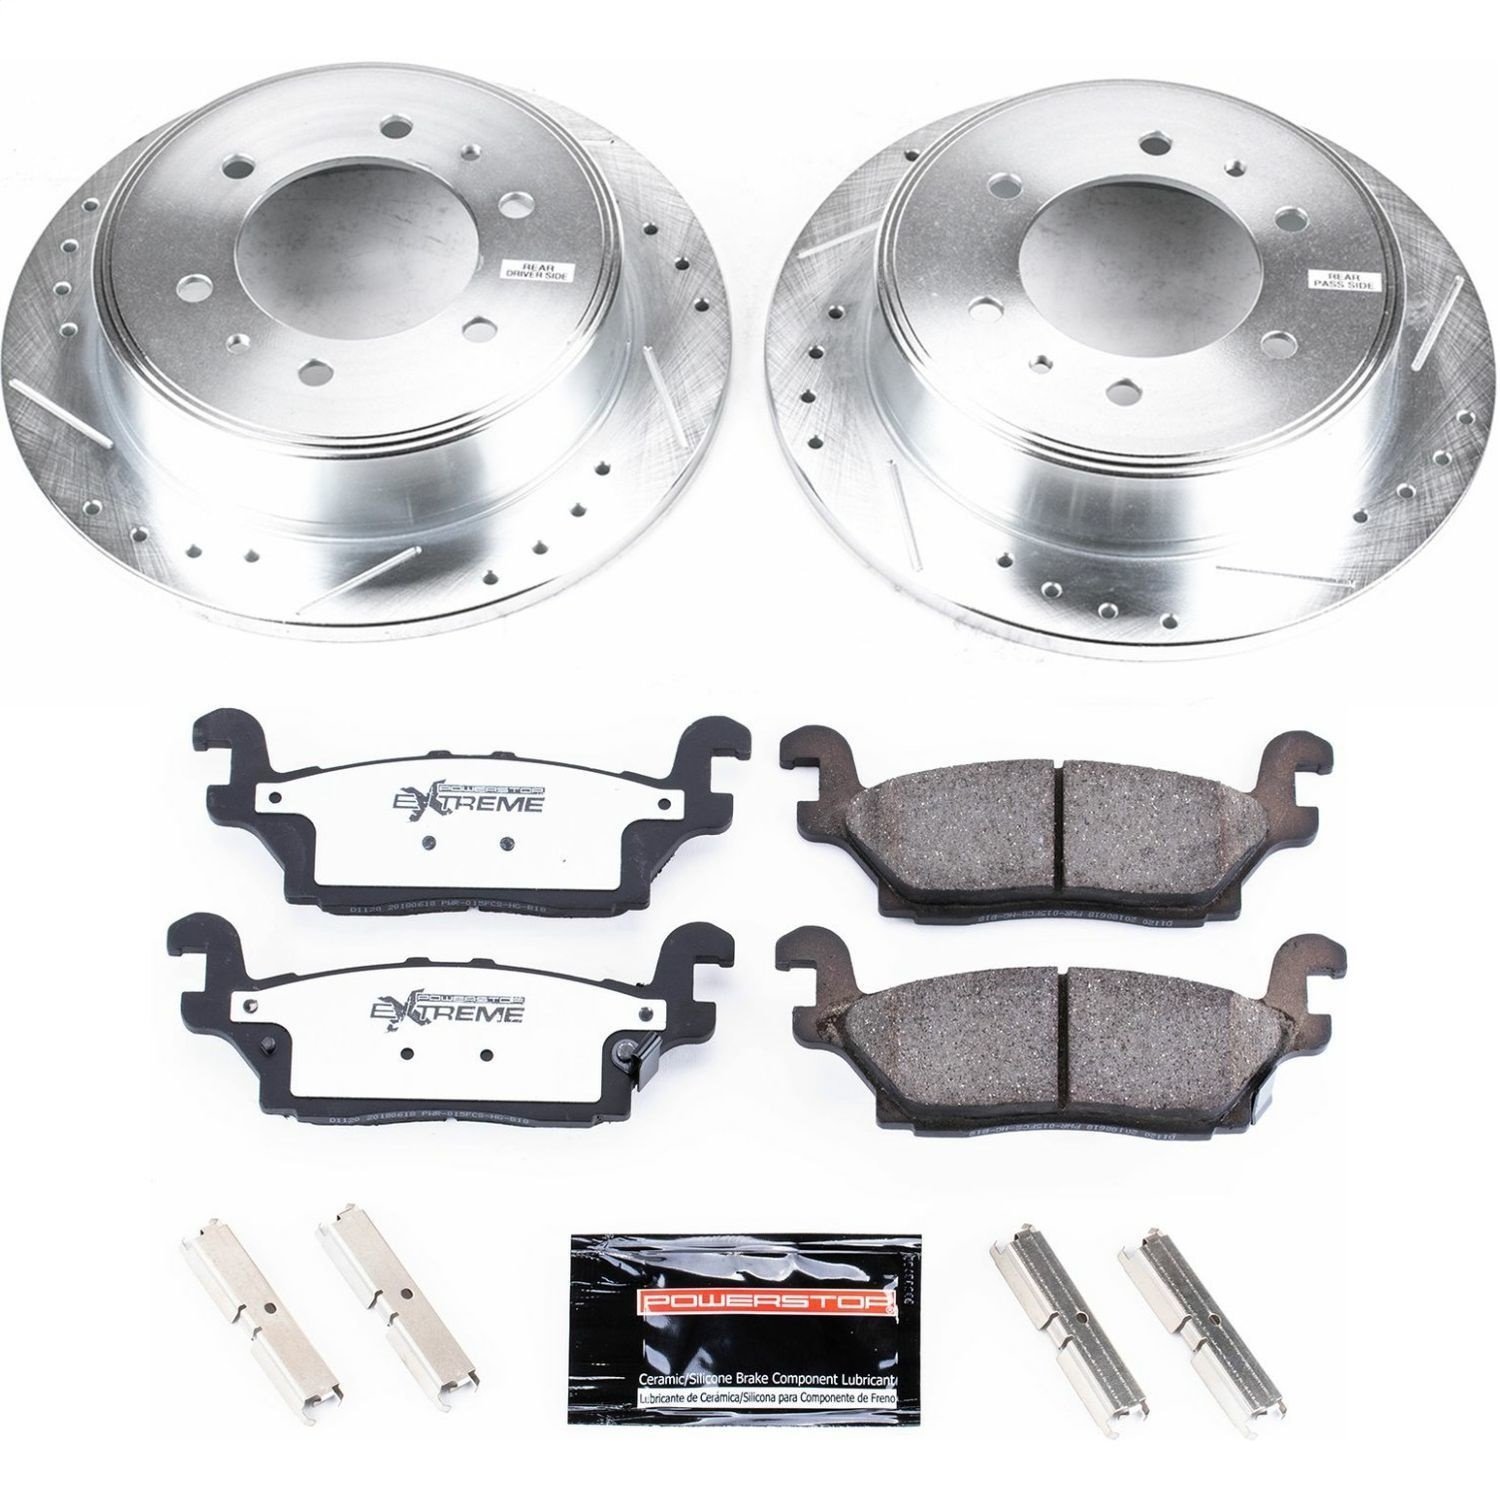 Z36 Rear Brake Pads & Rotor Kit for Truck and Towing for 2006-2010 Hummer H3, H3T